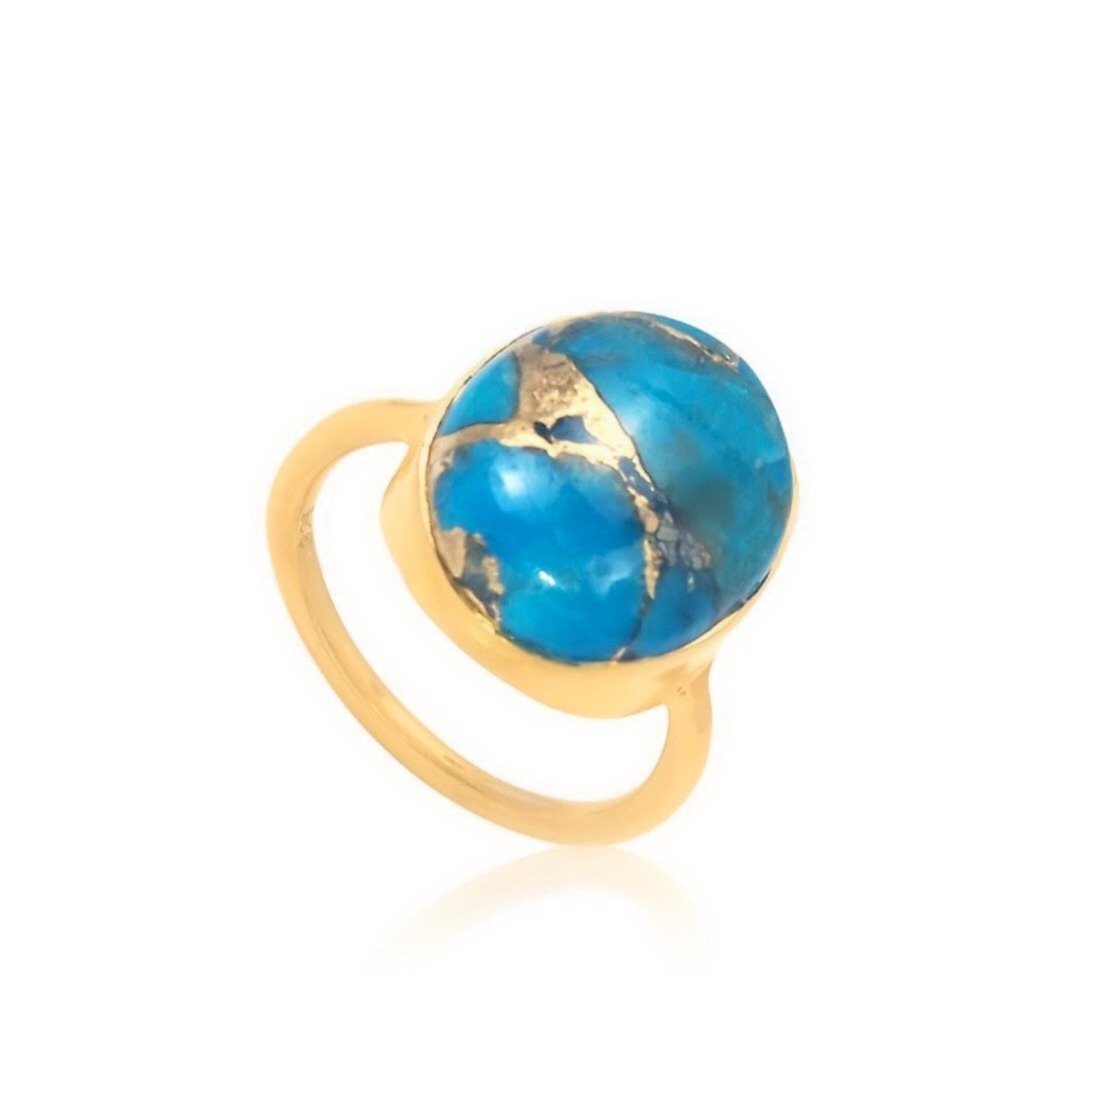 The XL Copper Turquoise Ring/18k Yellow Gold Vermeil in Copper Turquoise - infinityXinfinity.co.uk